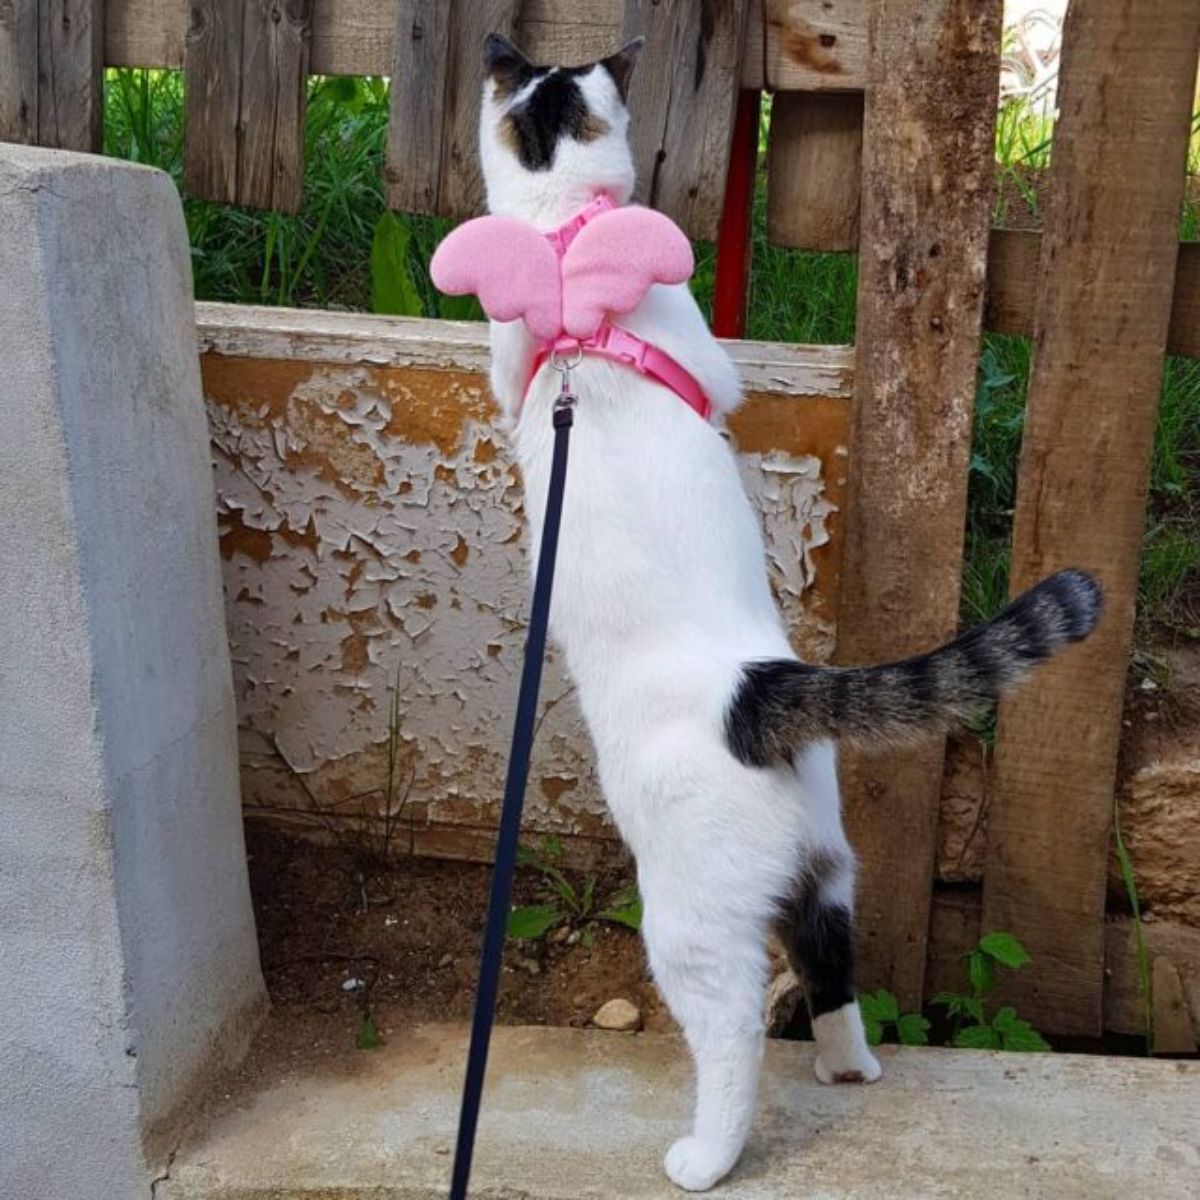 white and black cat on a leash and pink and red angel wings harness standing on hind legs and peeking through a wooden fence